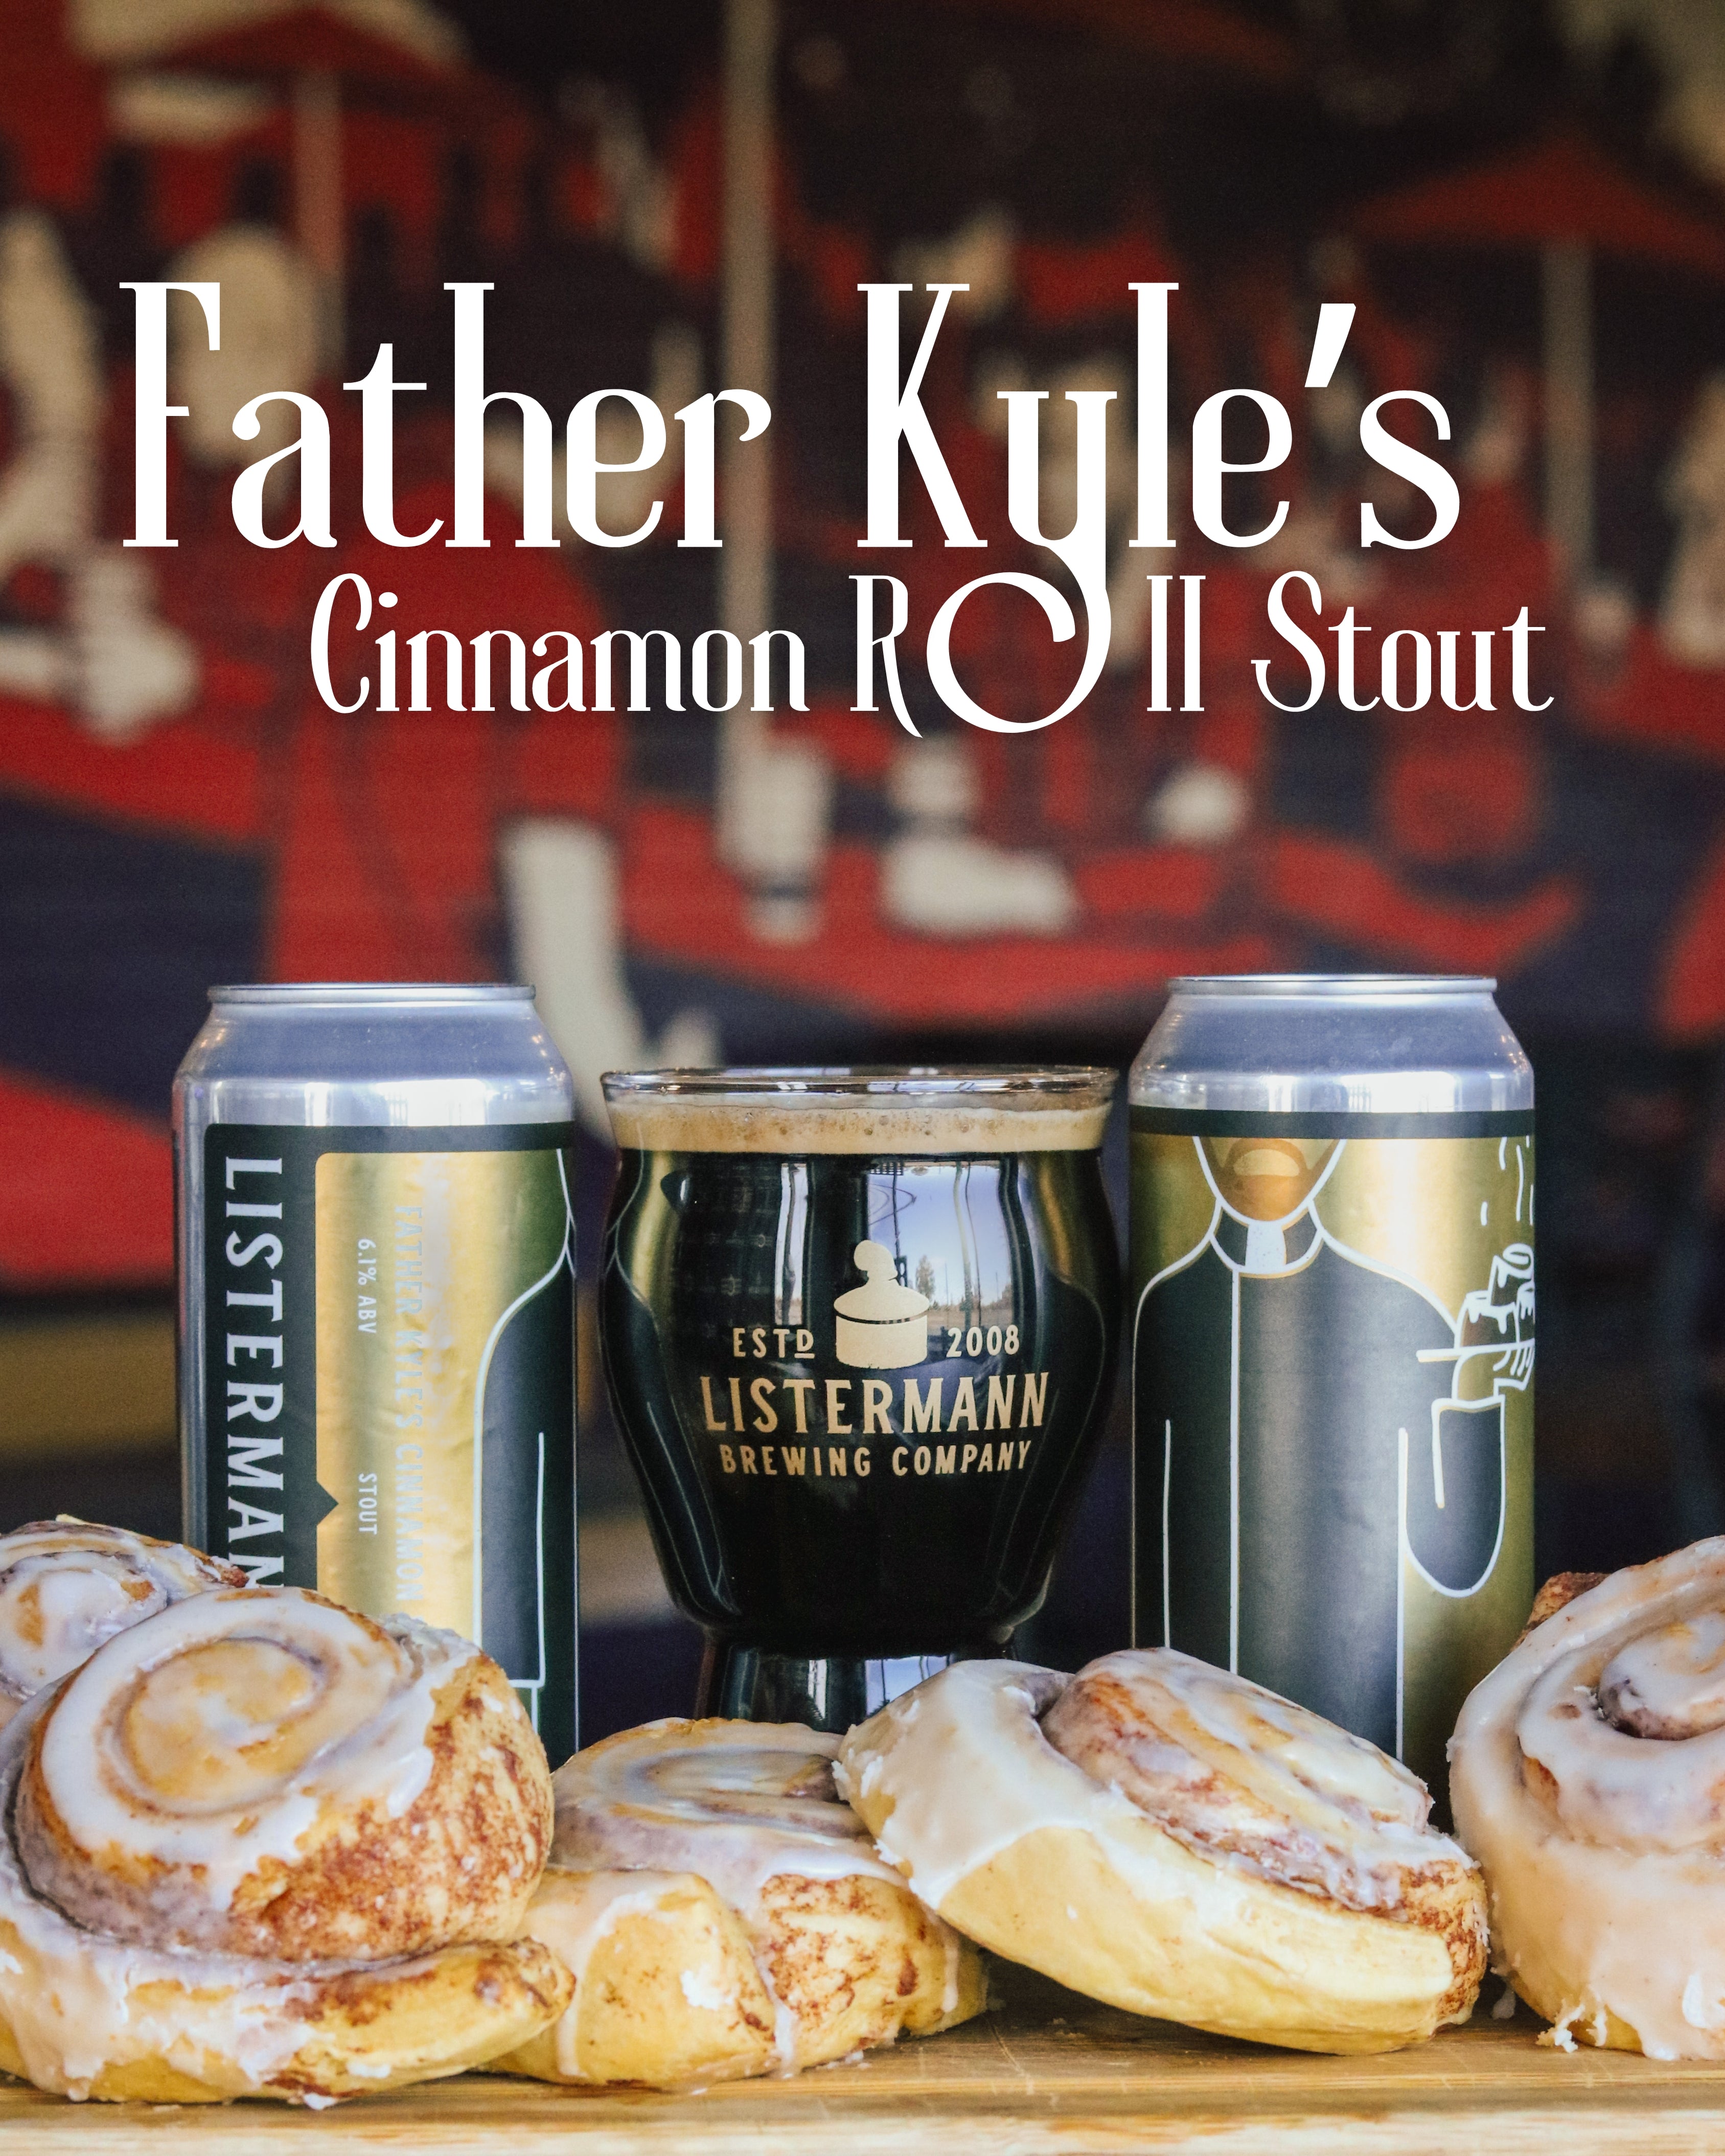 Father Kyle's Cinnamon Roll Stout